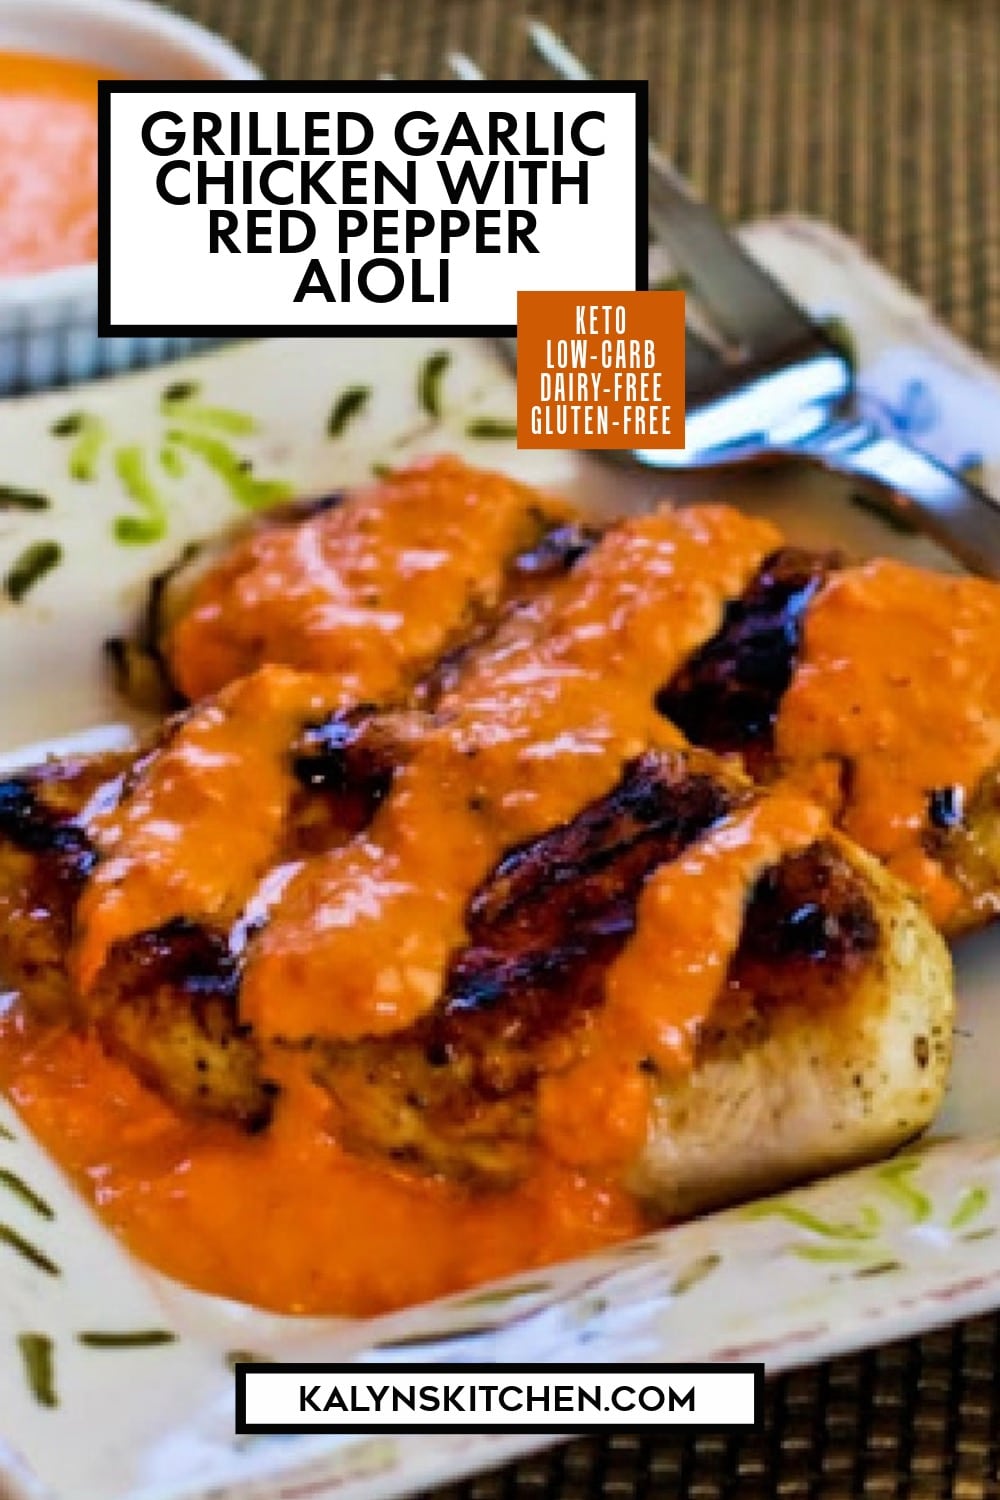 Pinterest image of Grilled Garlic Chicken with Red Pepper Aioli